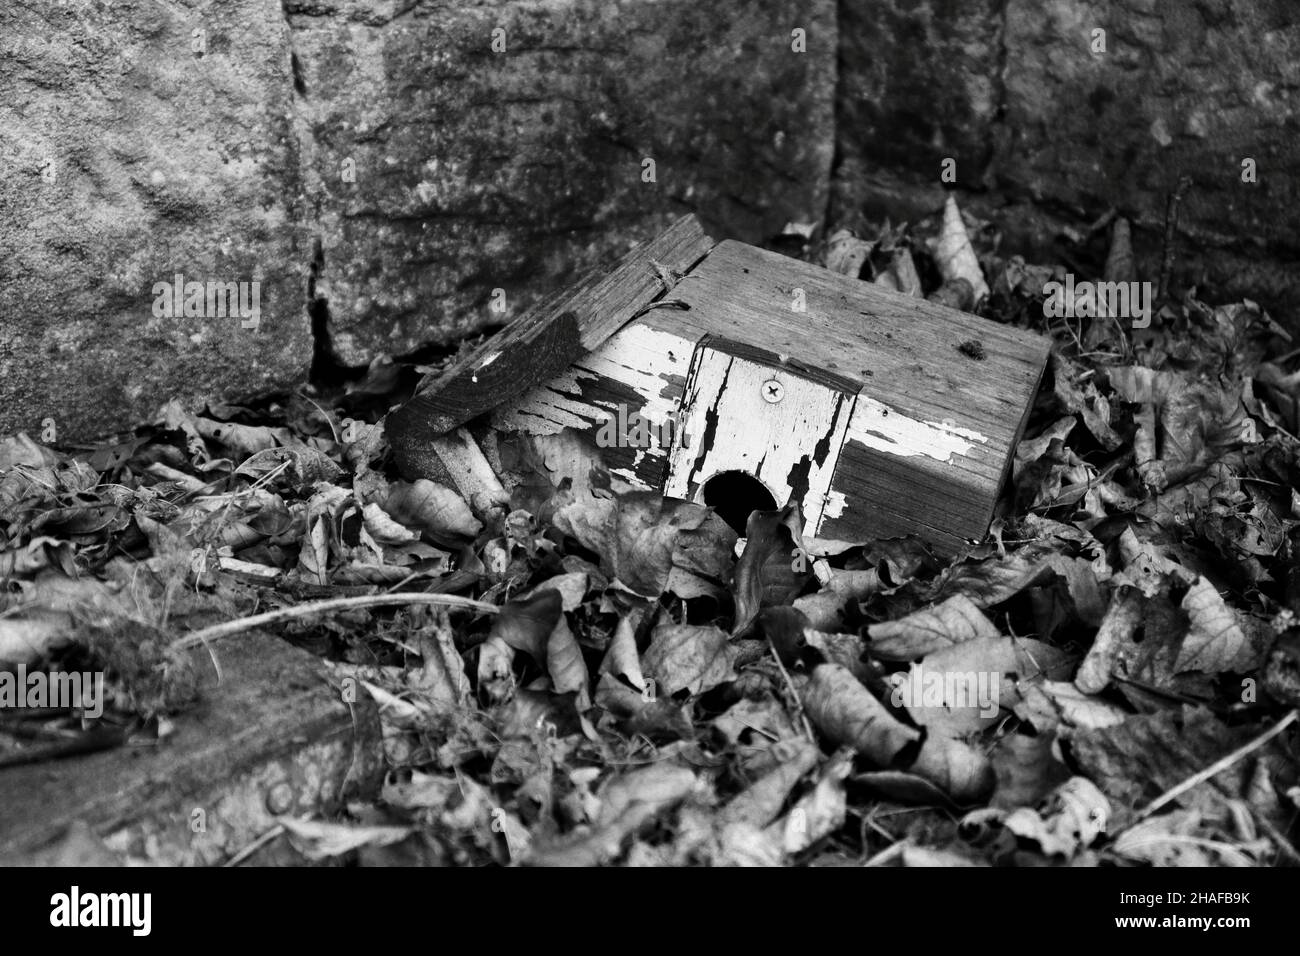 an old worn bird box lying in dead leaves in black and white Stock Photo